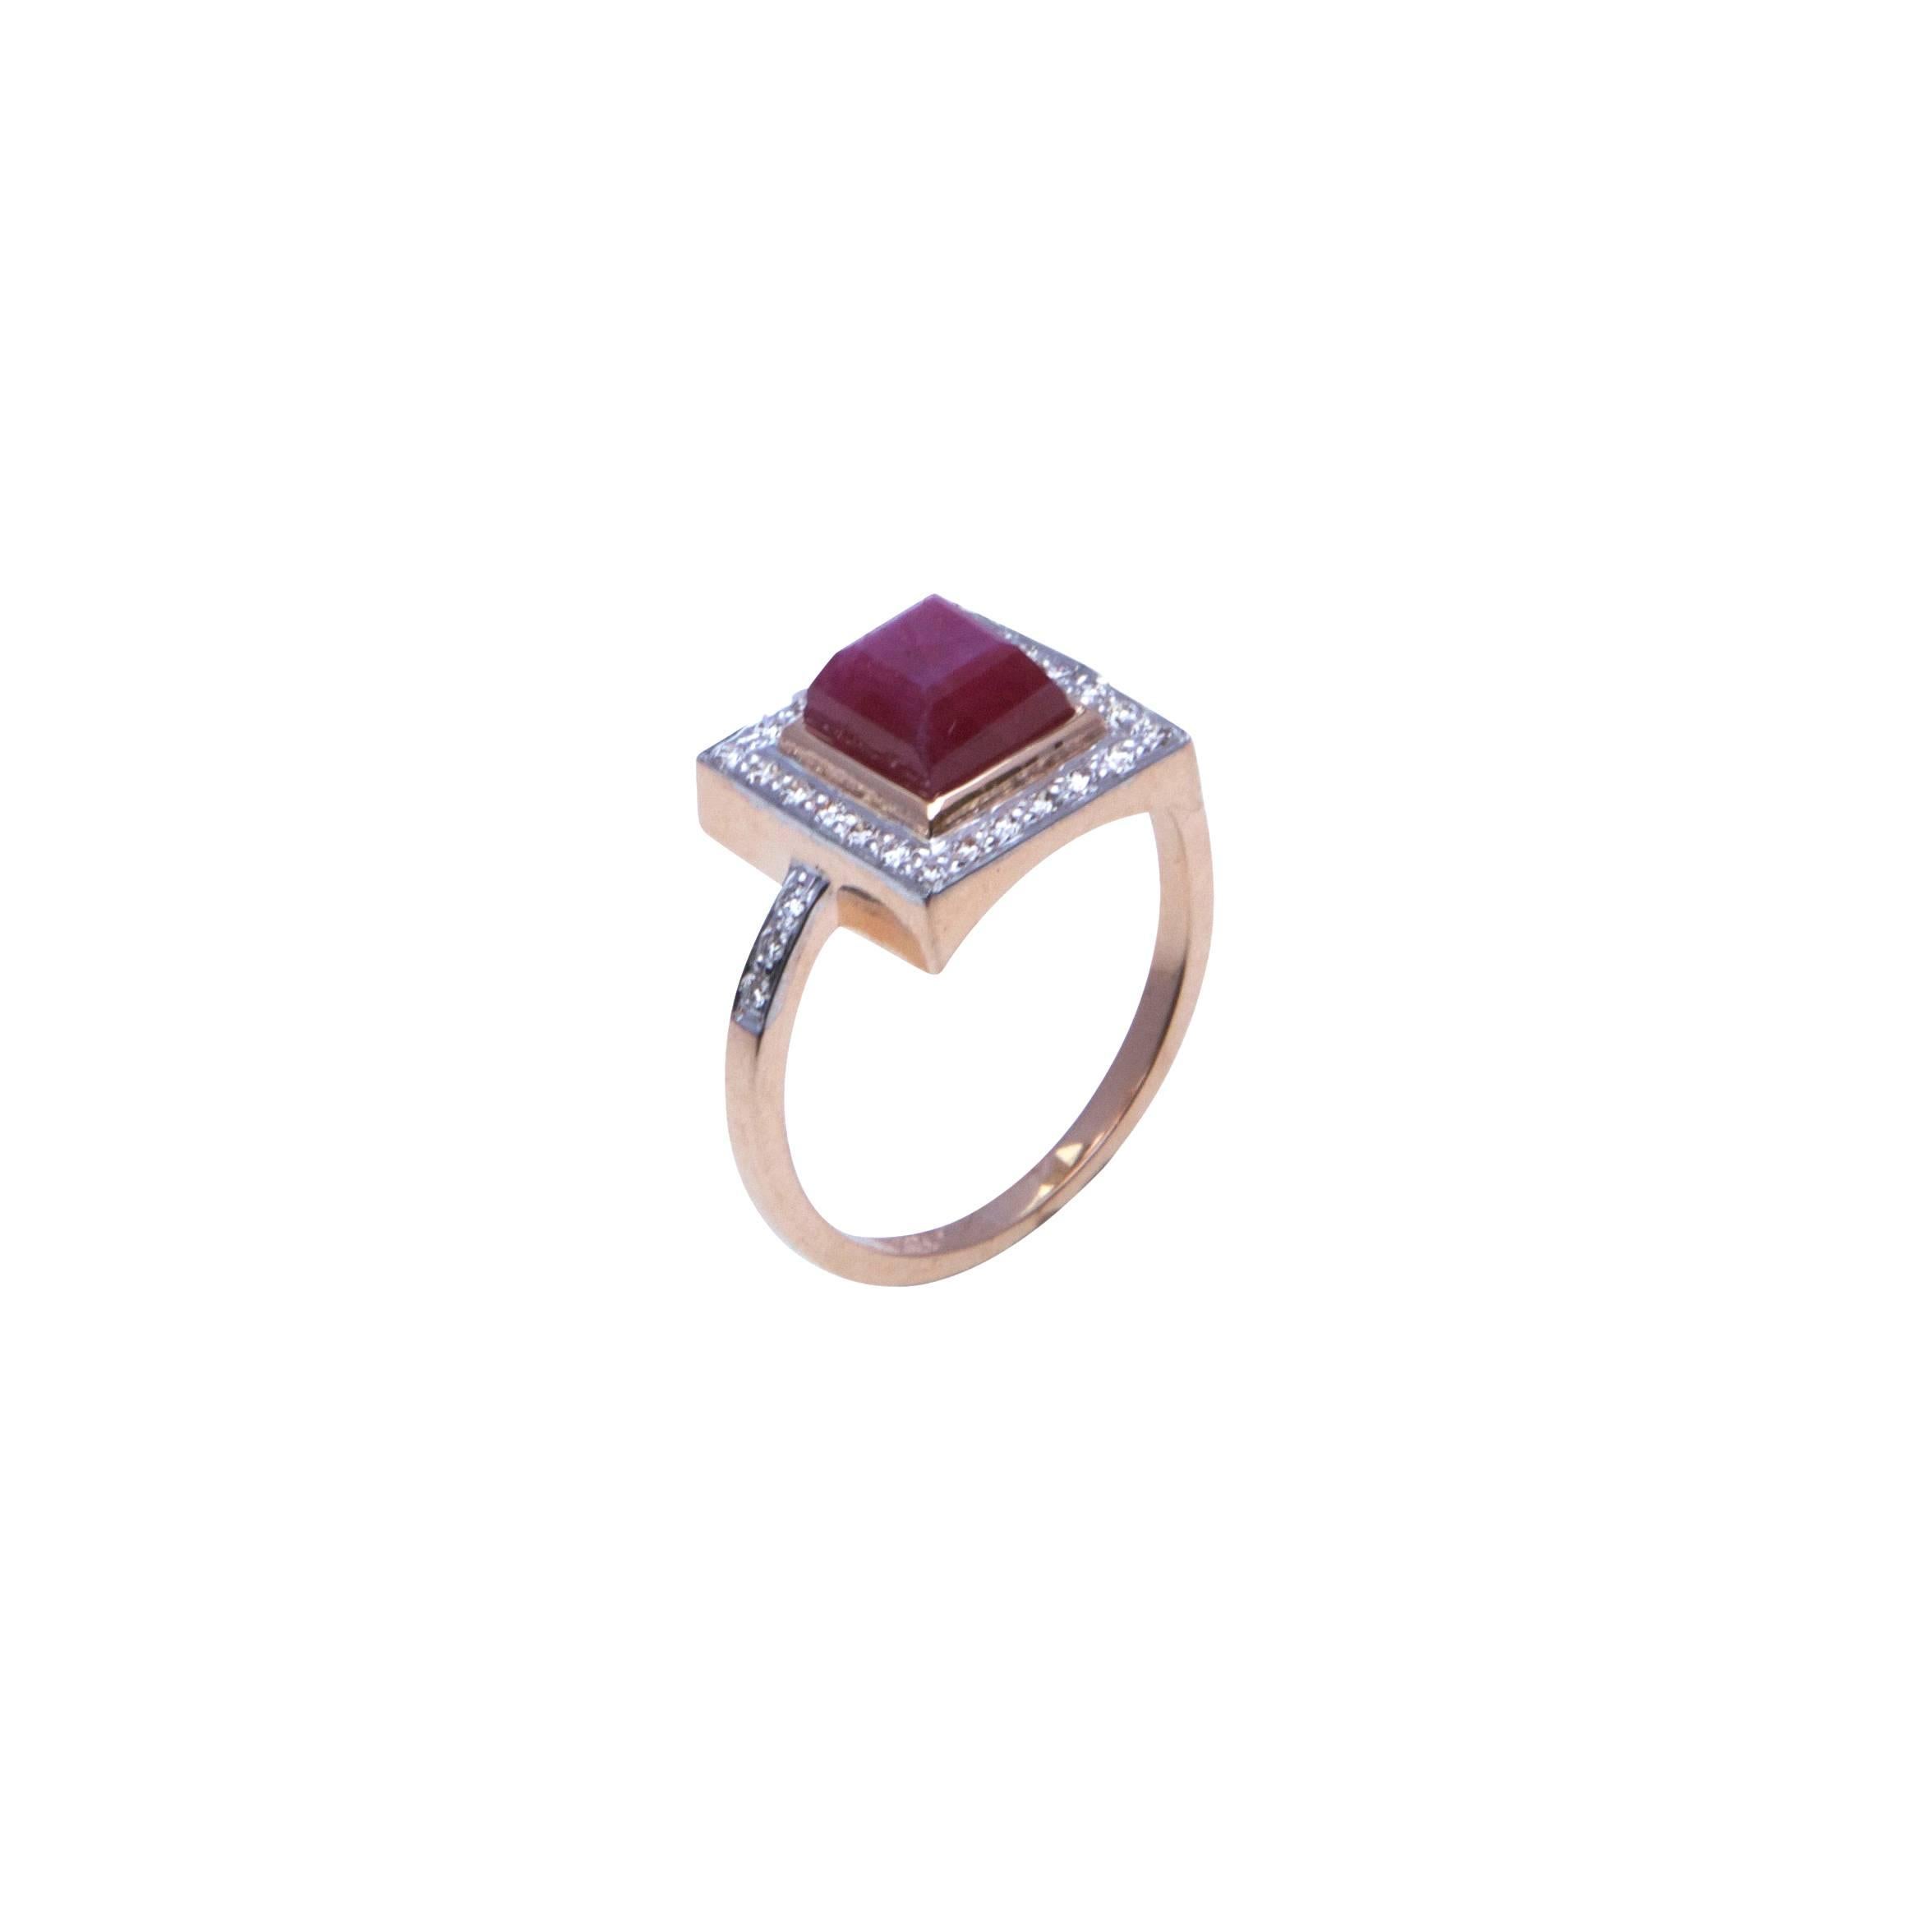 An elegant ruby and diamond ring in 18k rose gold from the new Neverending Romance Collection.

Ruby - 2.36 ct             
Diamond - 0.23 ct
